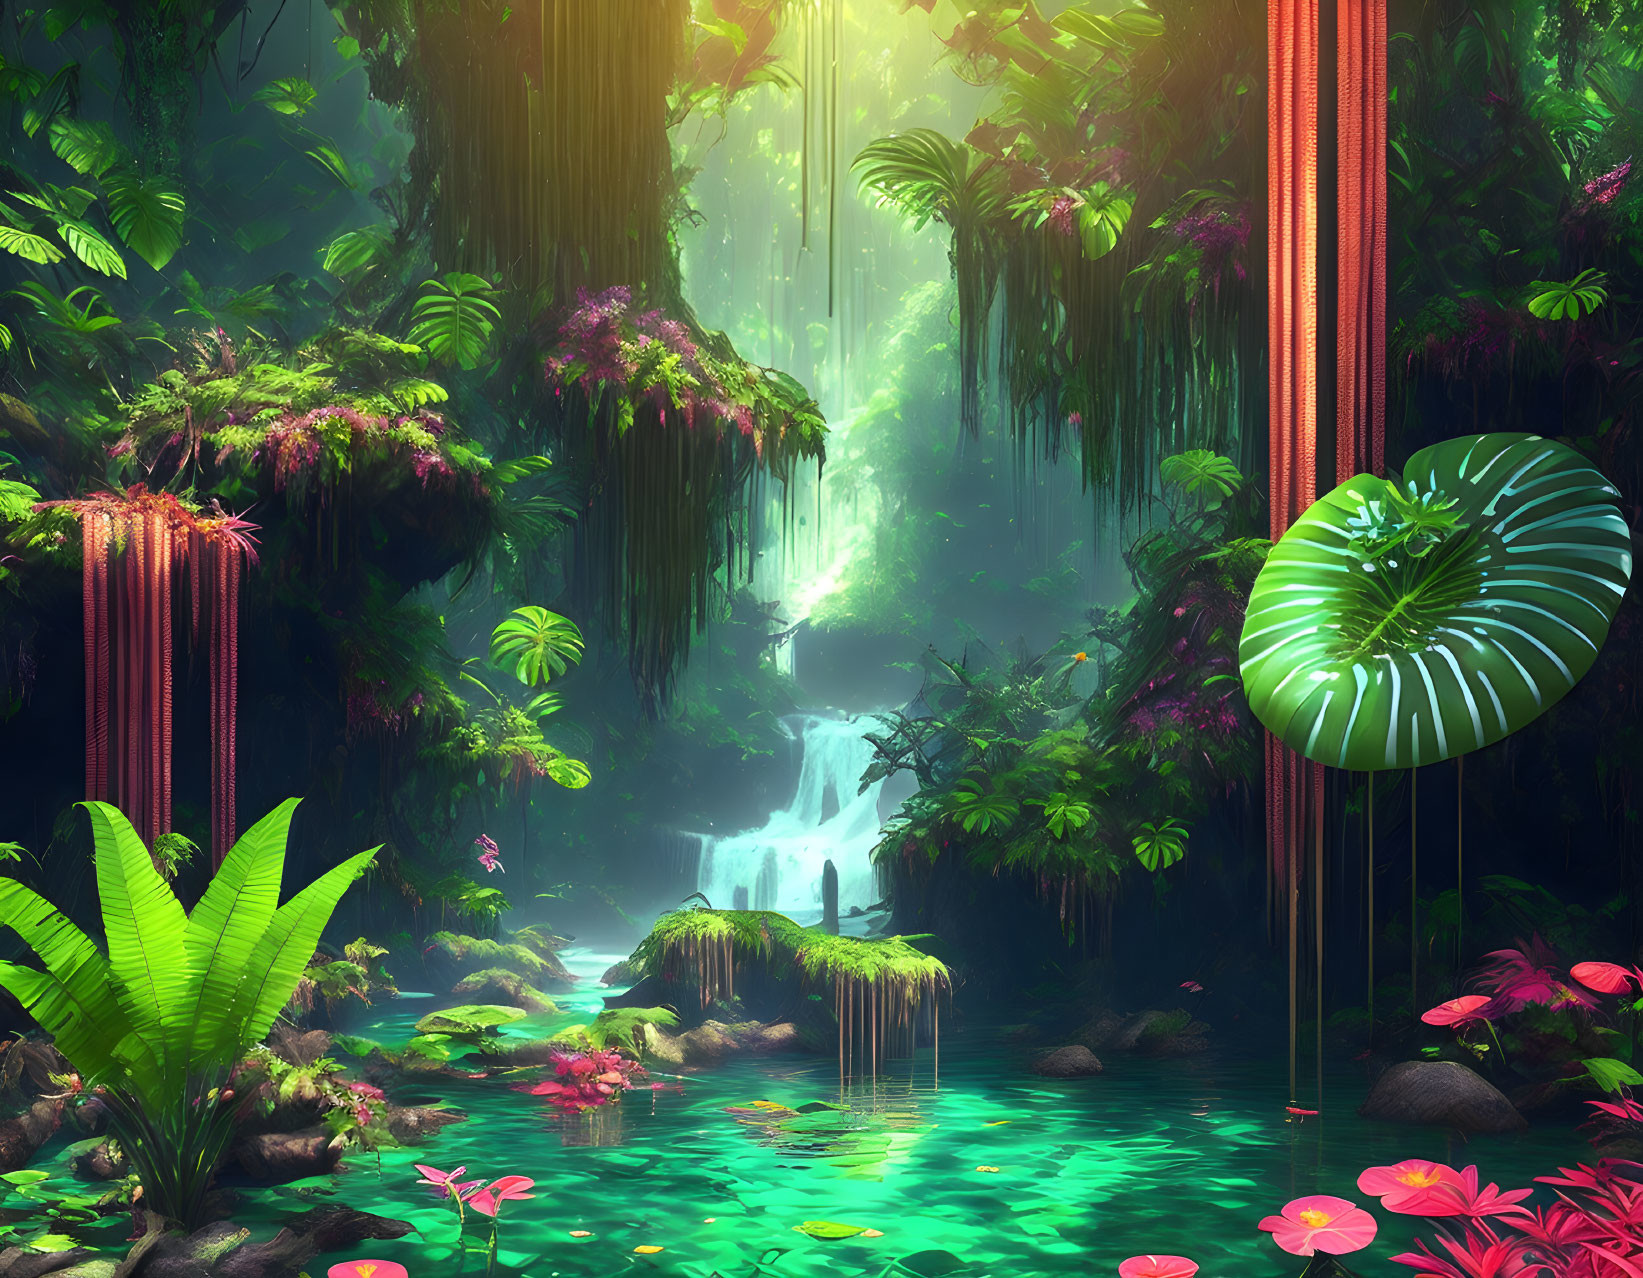 Lush otherworldly forest with waterfall and pink flowers